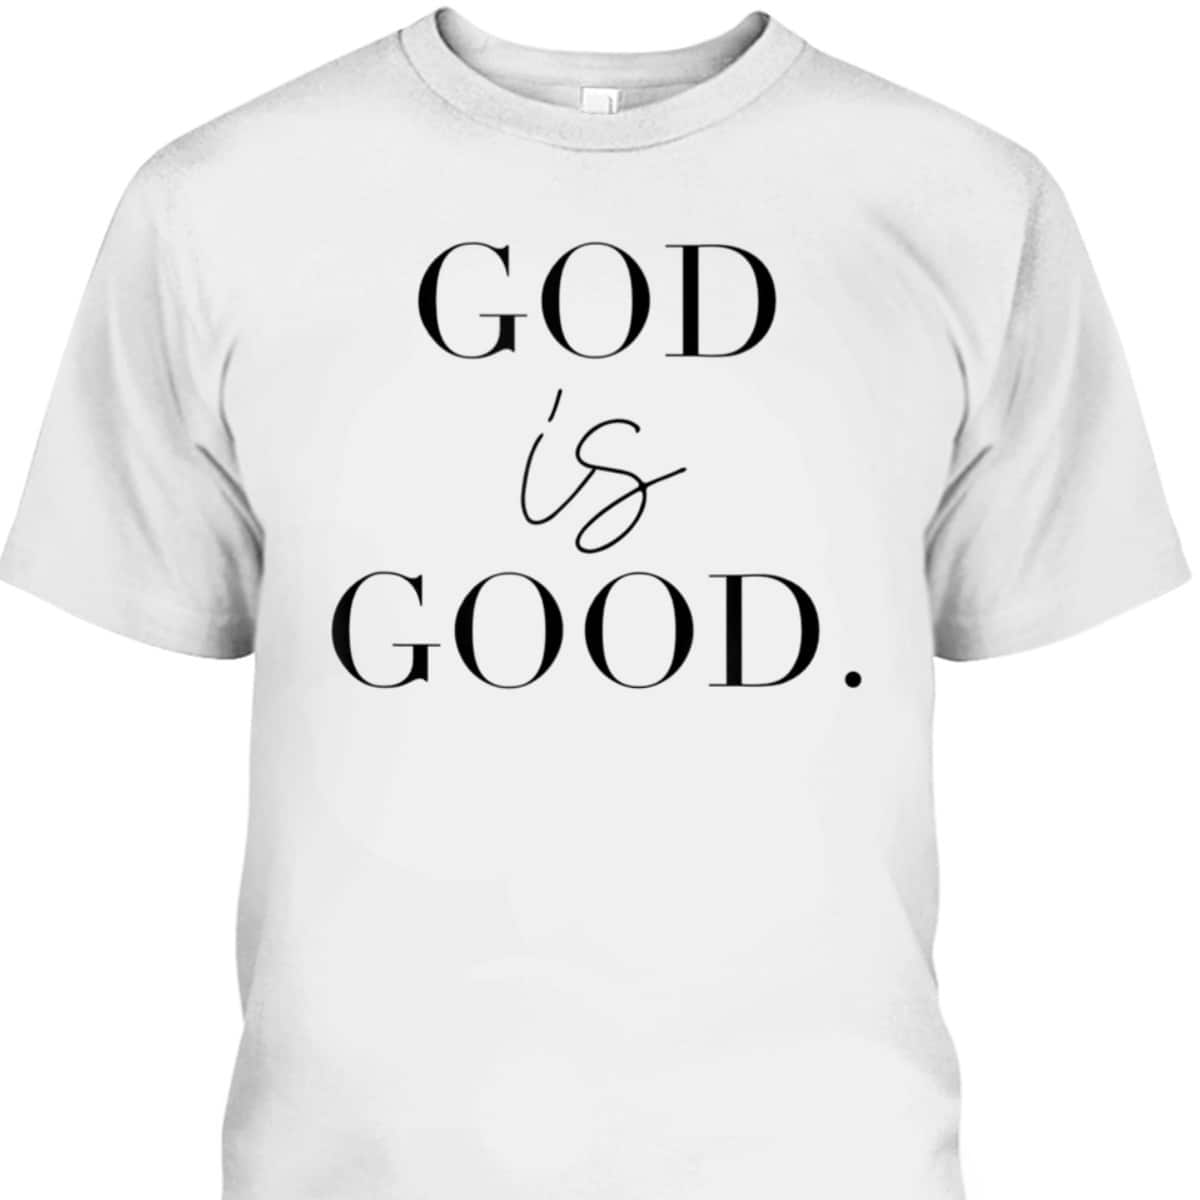 God Is Good Best T-Shirt For Believers And God Lovers